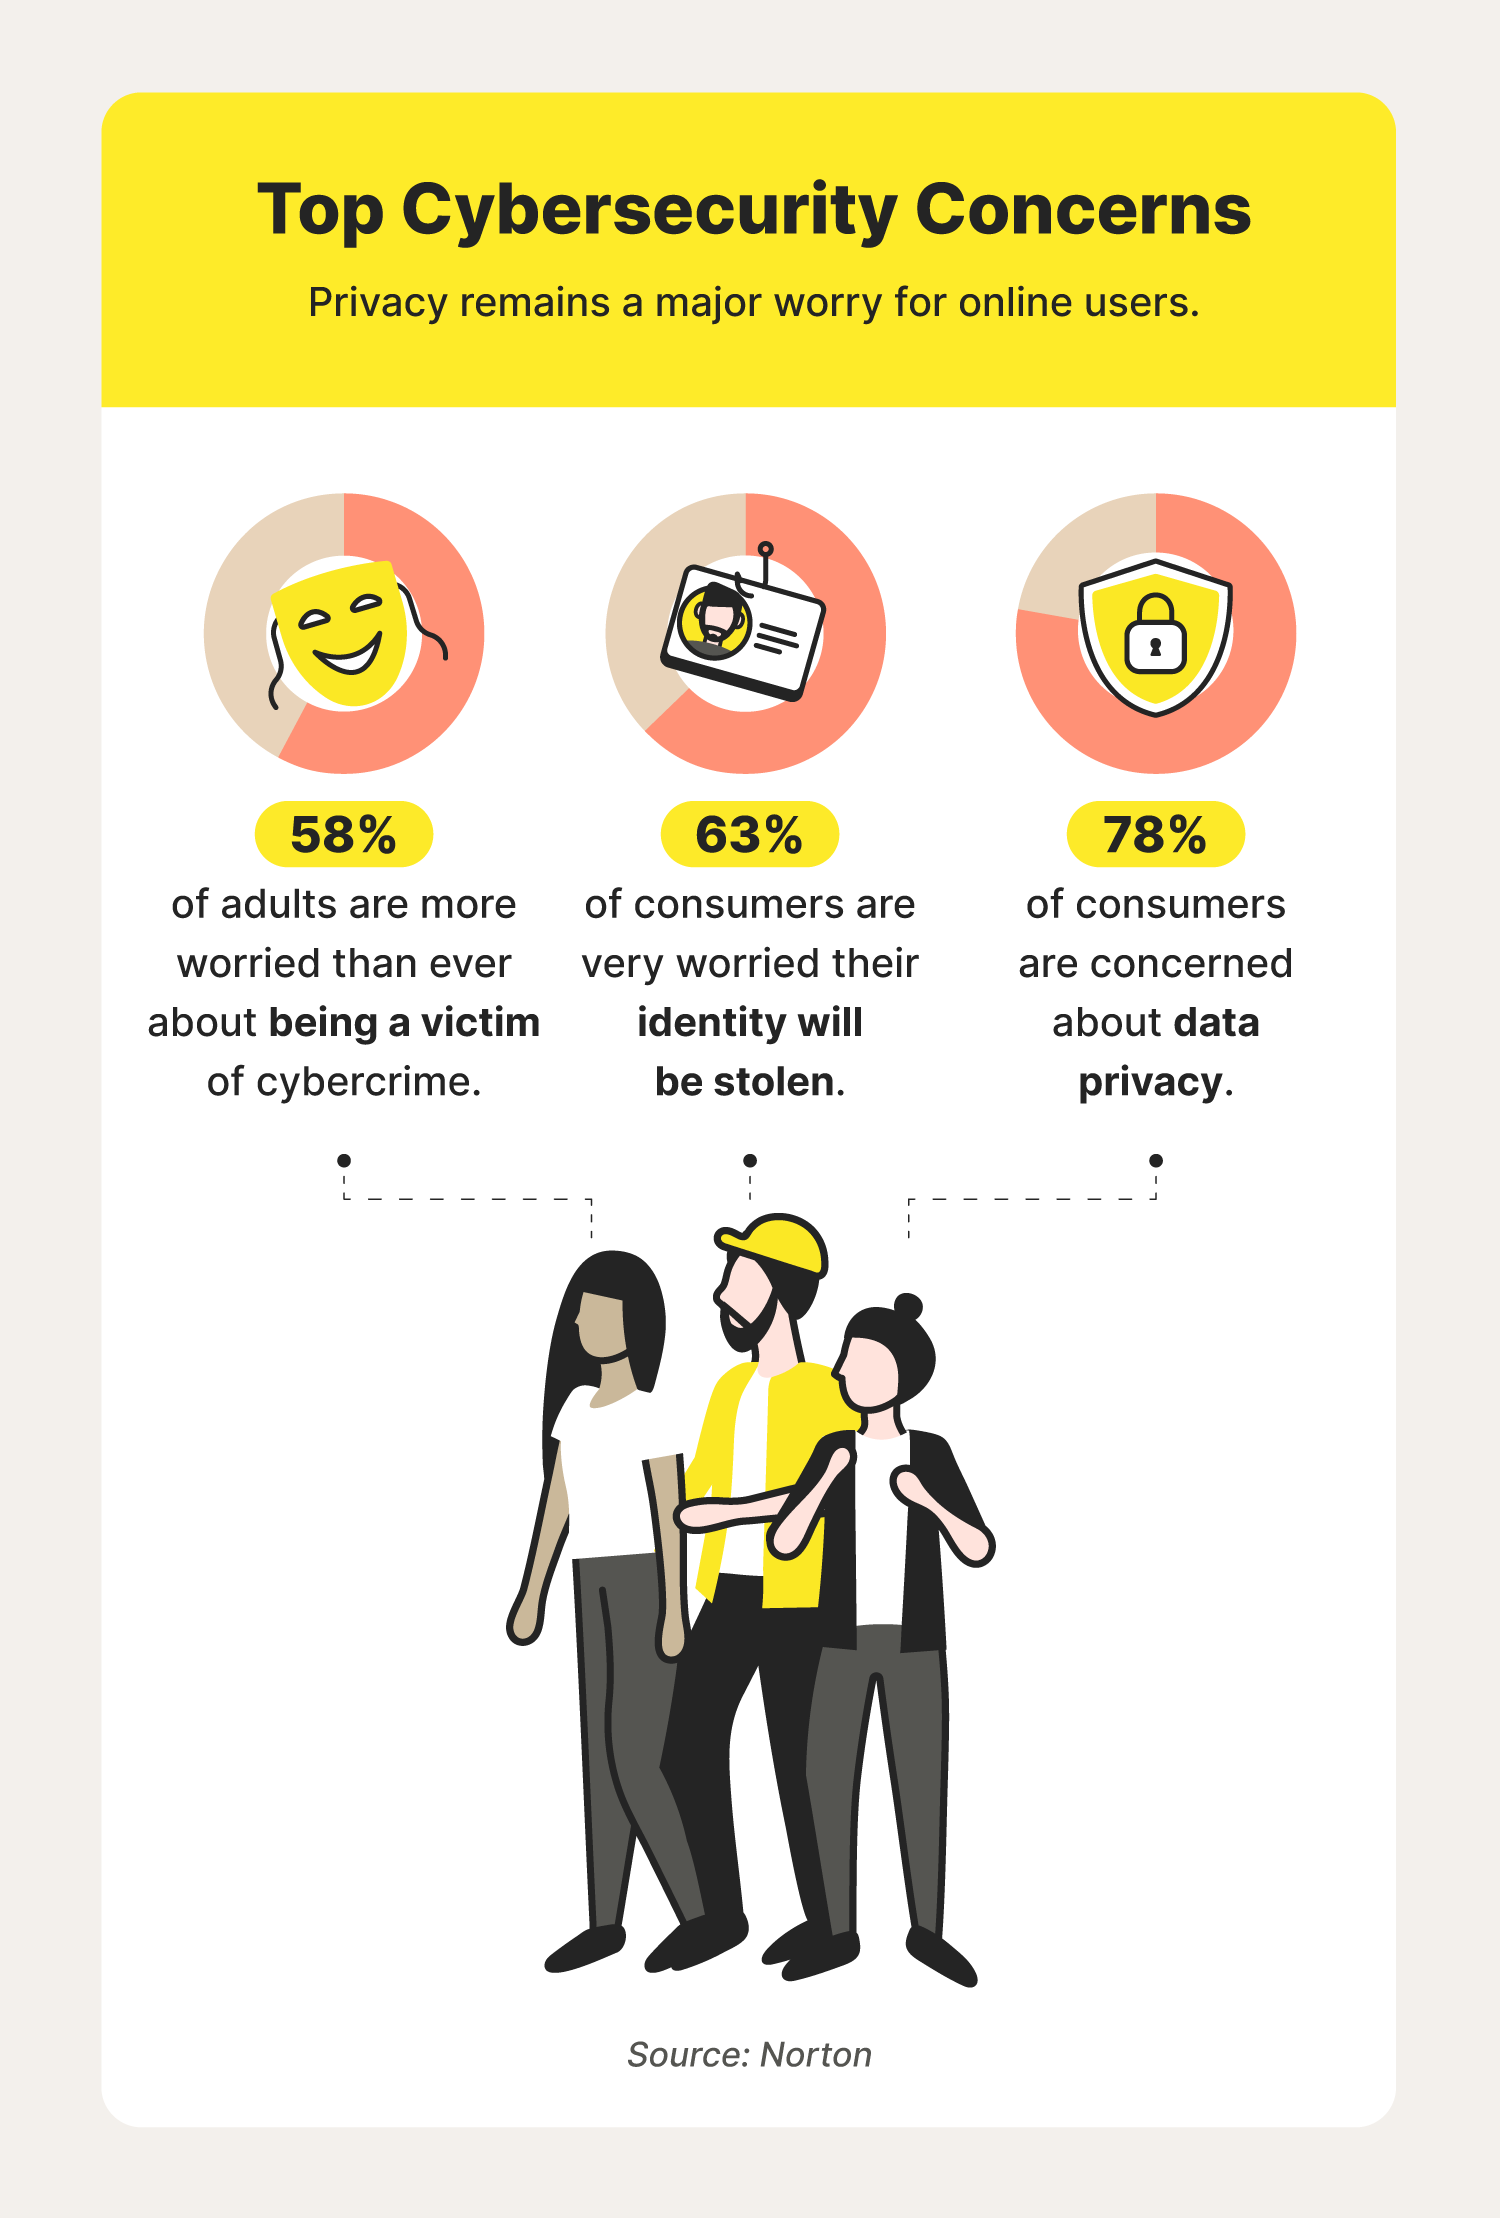 A graphic illustrates cybersecurity statistics related to privacy concerns amongst internet users.